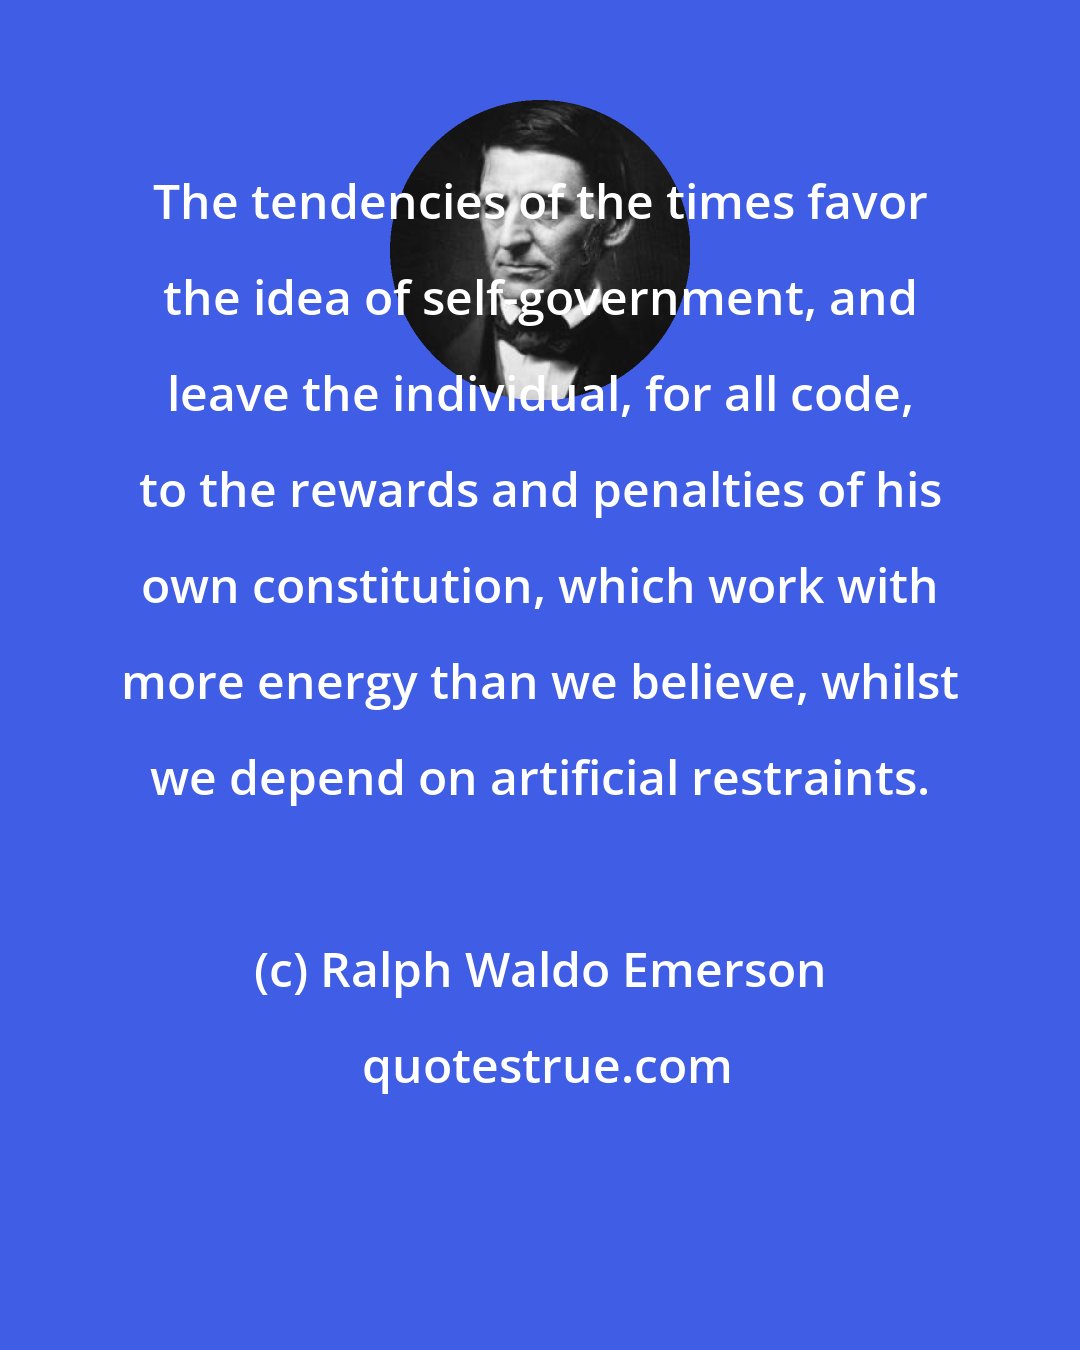 Ralph Waldo Emerson: The tendencies of the times favor the idea of self-government, and leave the individual, for all code, to the rewards and penalties of his own constitution, which work with more energy than we believe, whilst we depend on artificial restraints.